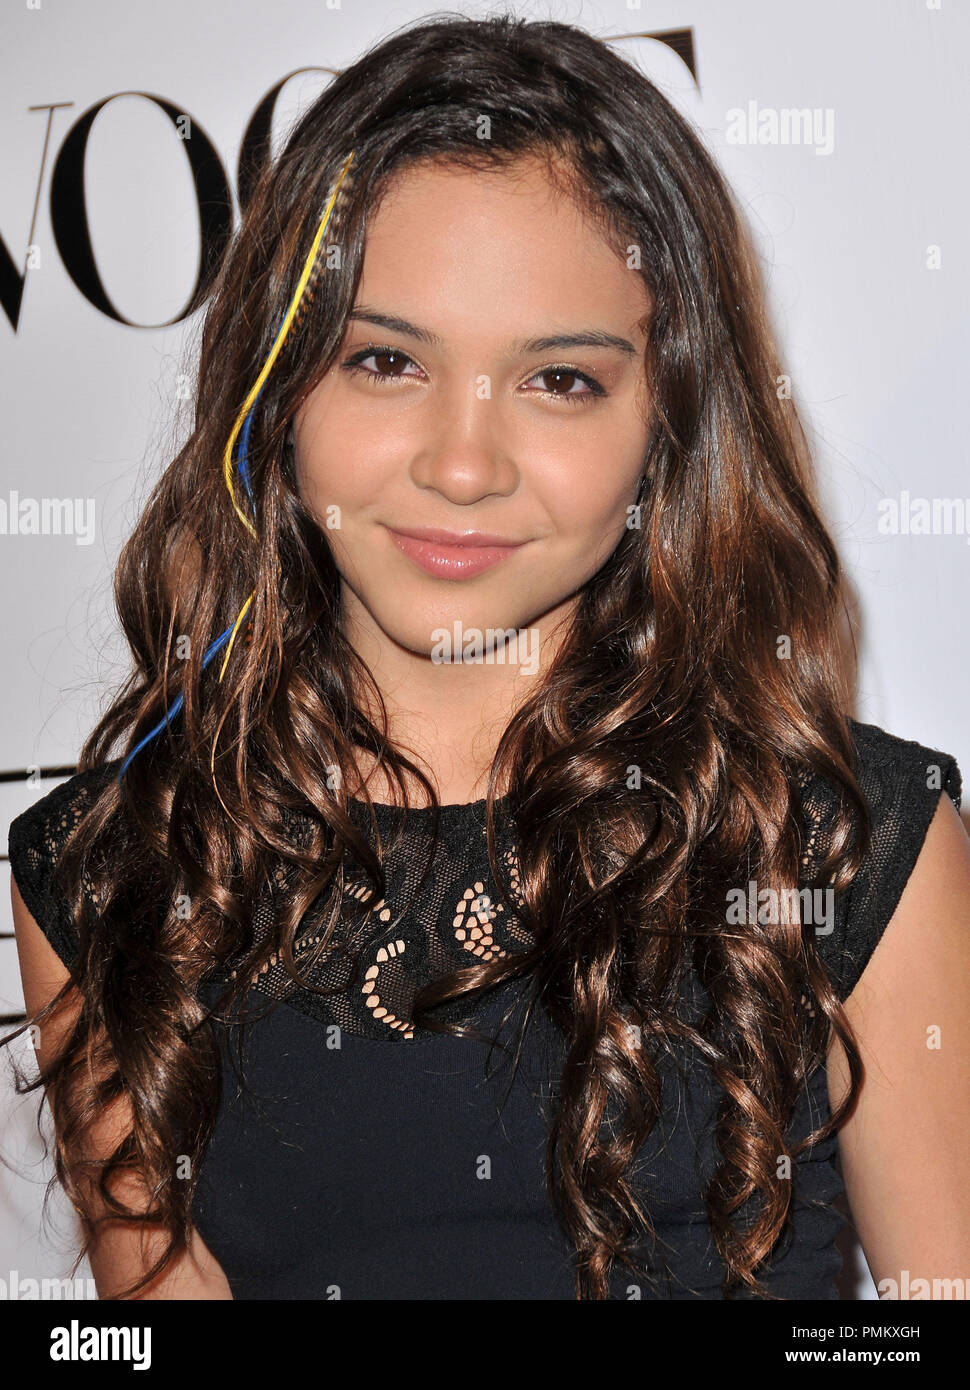 Stella Hudgens at the 9th Annual Teen Vogue Young Hollywood Party held at the Paramount Studios in Hollywood, CA. The event took place on Friday, September 23, 2011. Photo by PRPP Pacific Rim Photo Press/ PictureLux Stock Photo